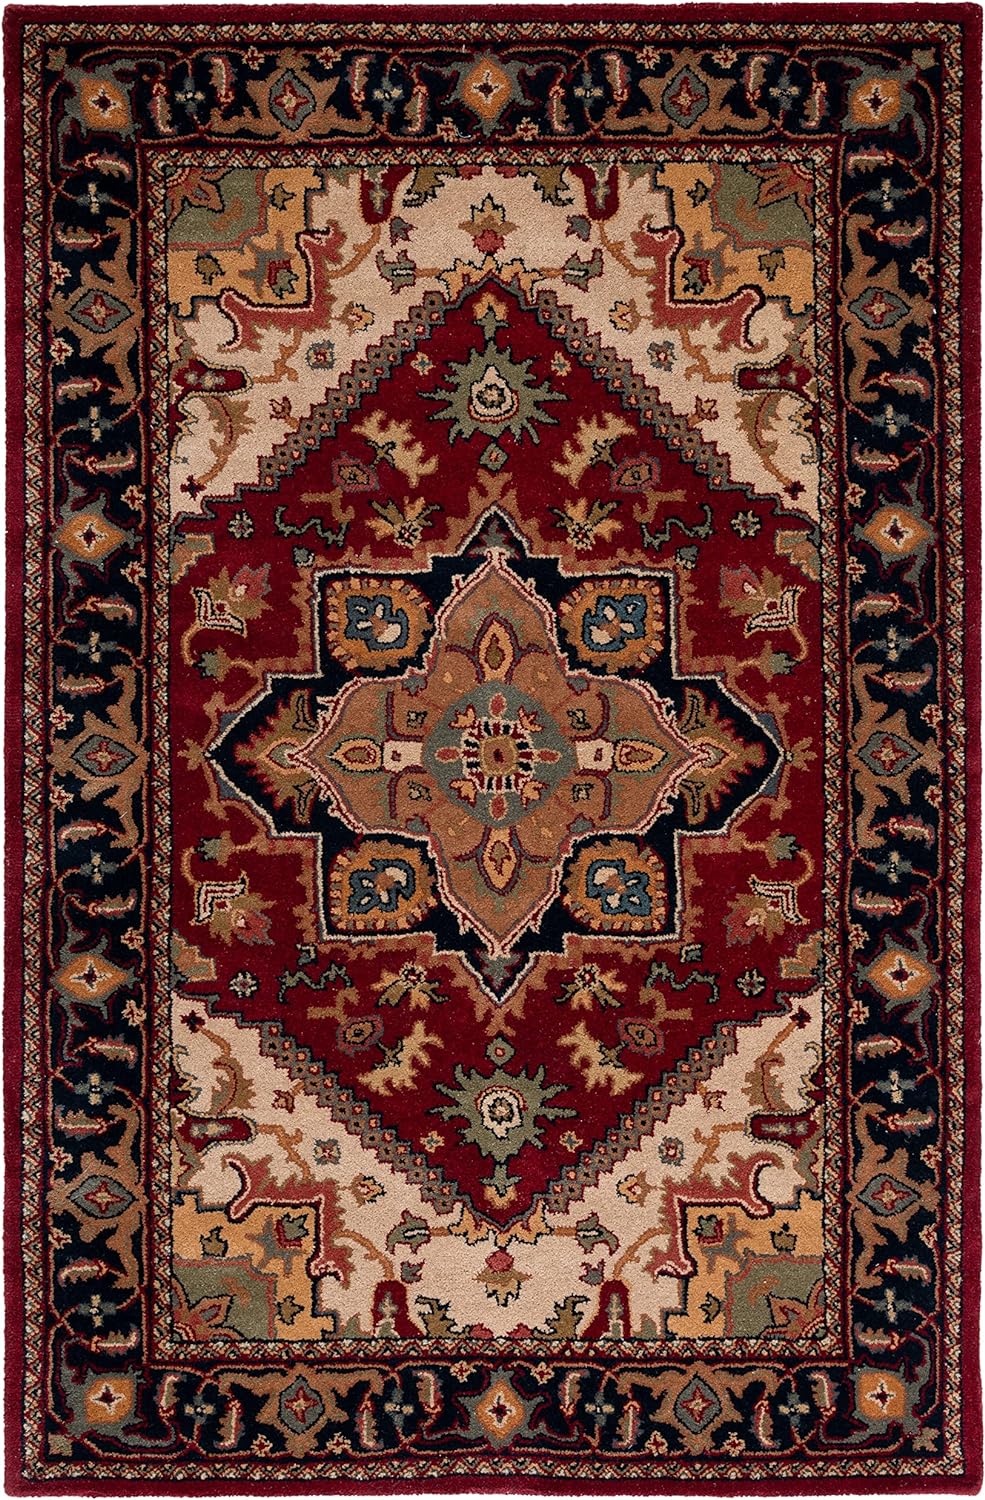 Avyay Rugs Handmade Traditional Oriental Wool, Ideal for High Traffic Areas in Living Room, Bedroom